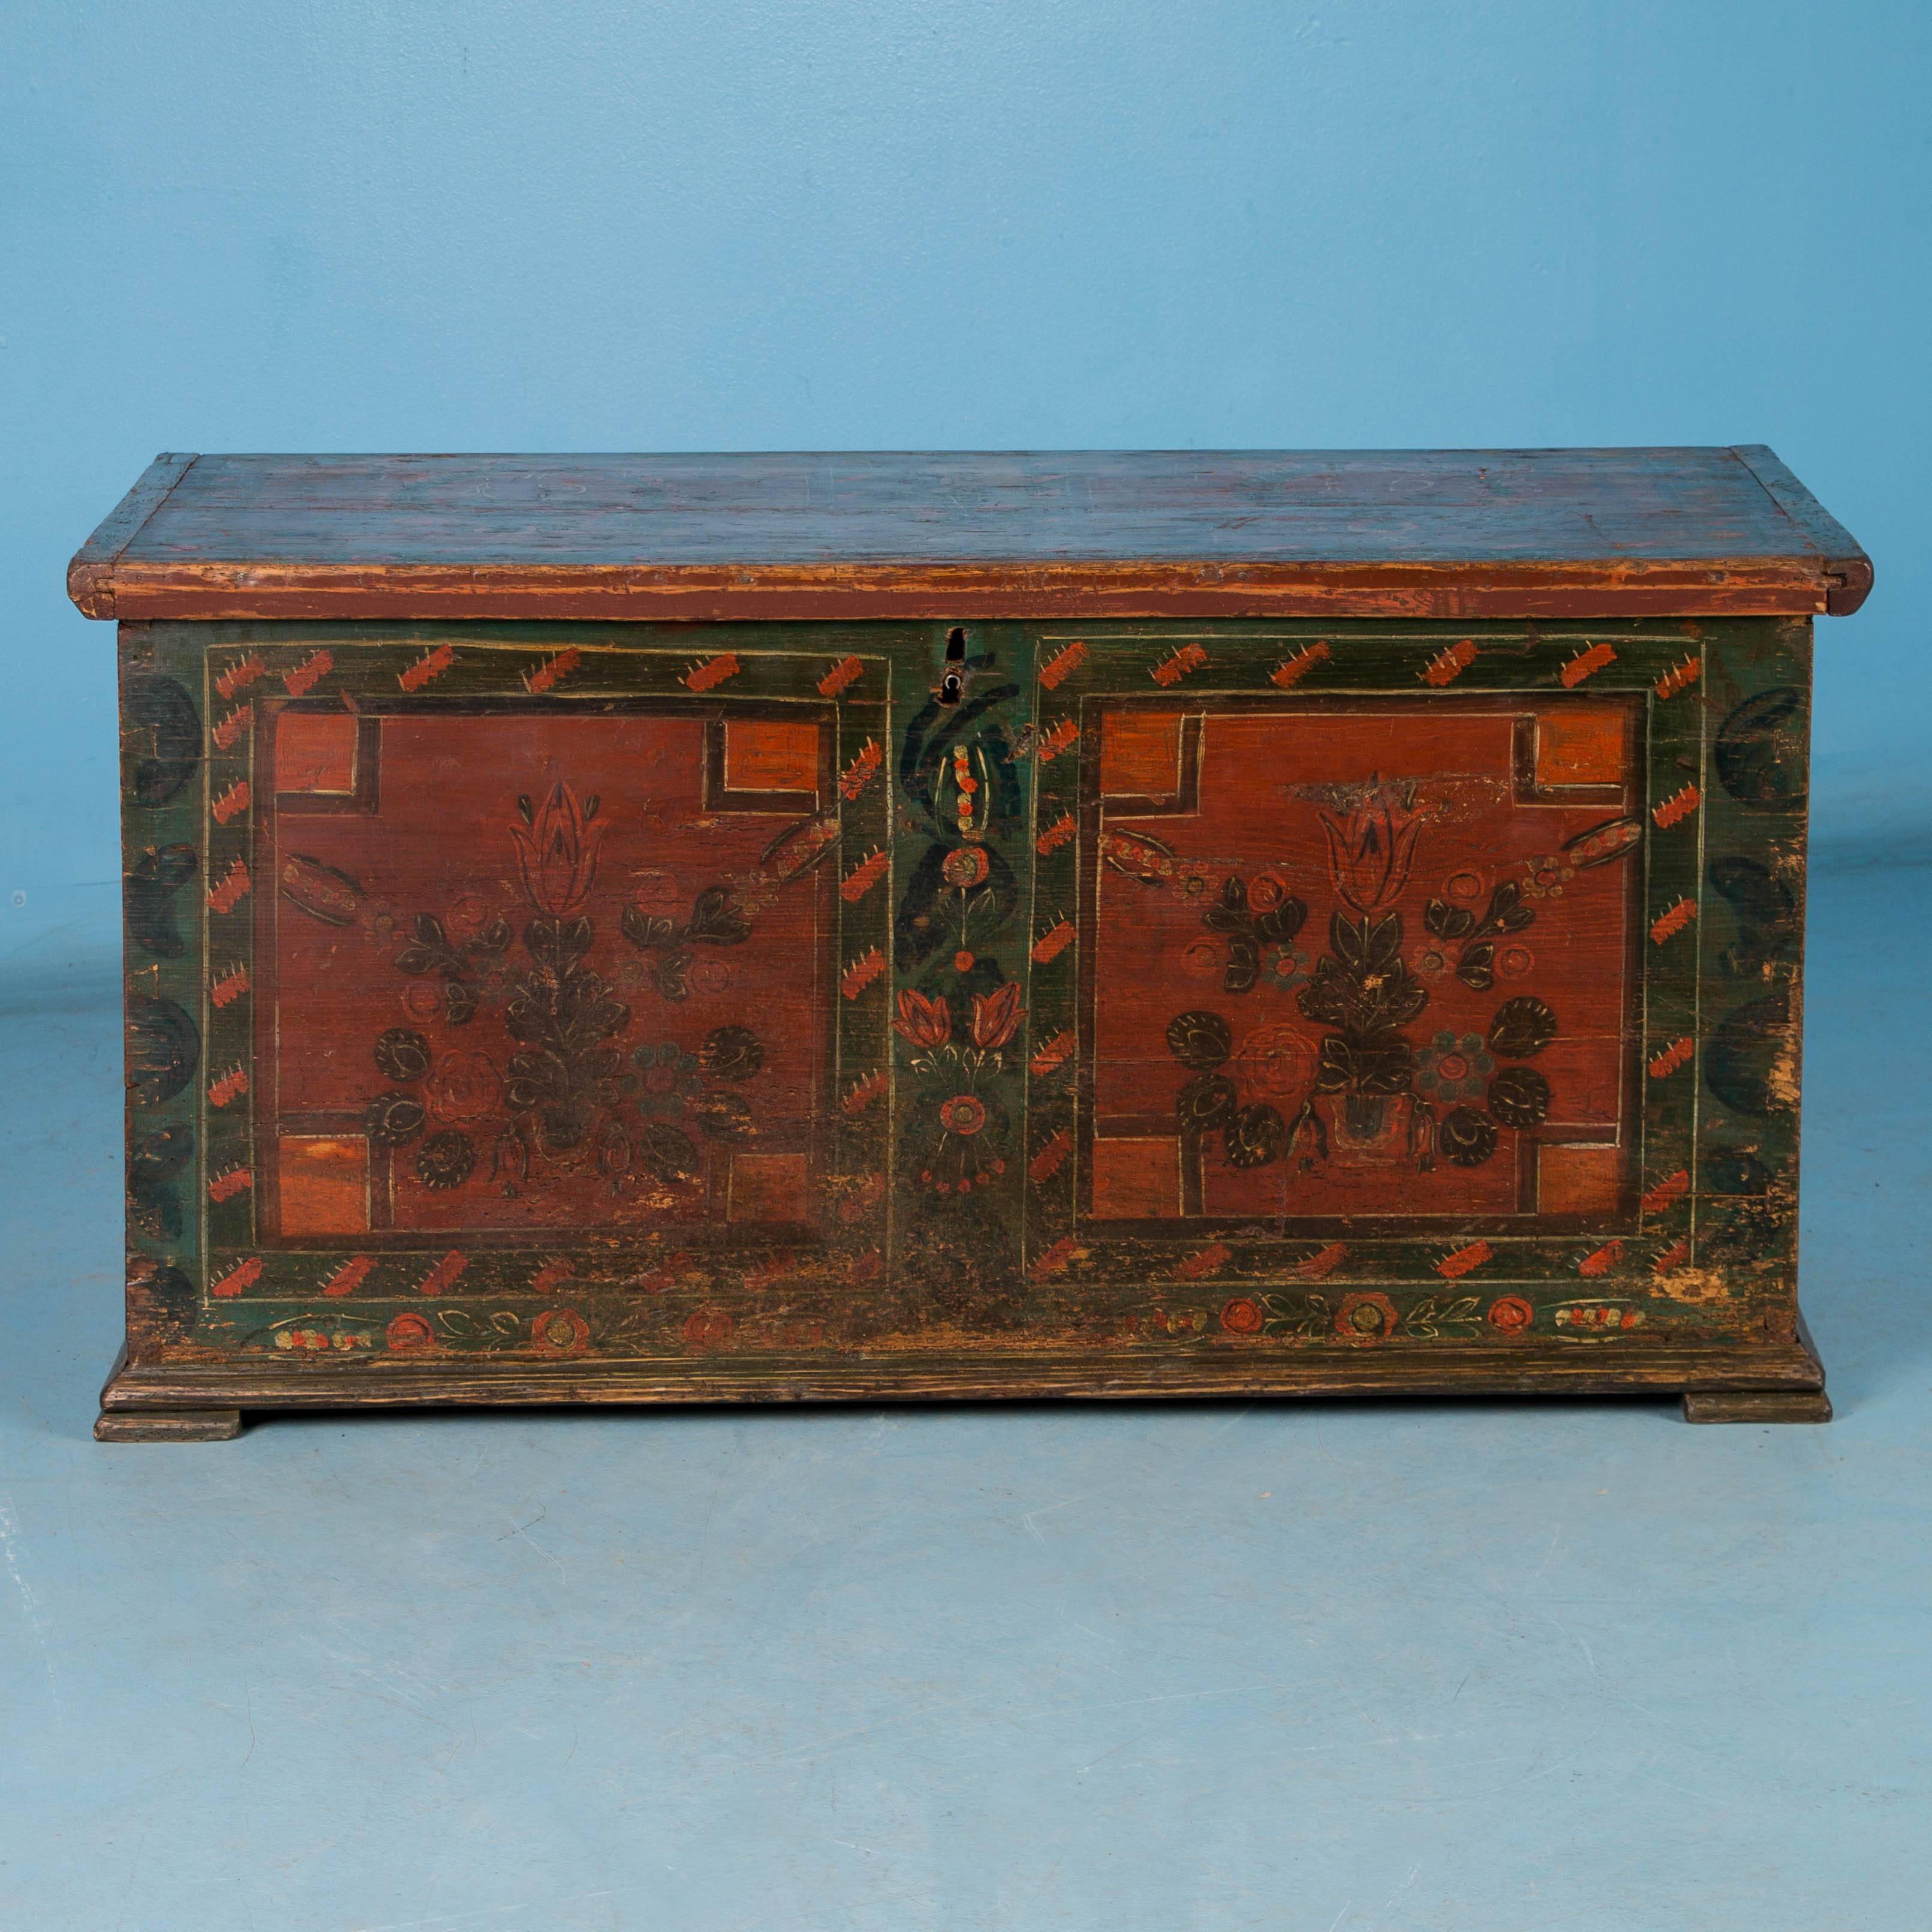 This original painted trunk with red and green floral details is a great example of Romanian folk art and is dated 1915. The flat top allows it to serve many functions in a modern home, including small coffee table, side table, blanket or toy chest.